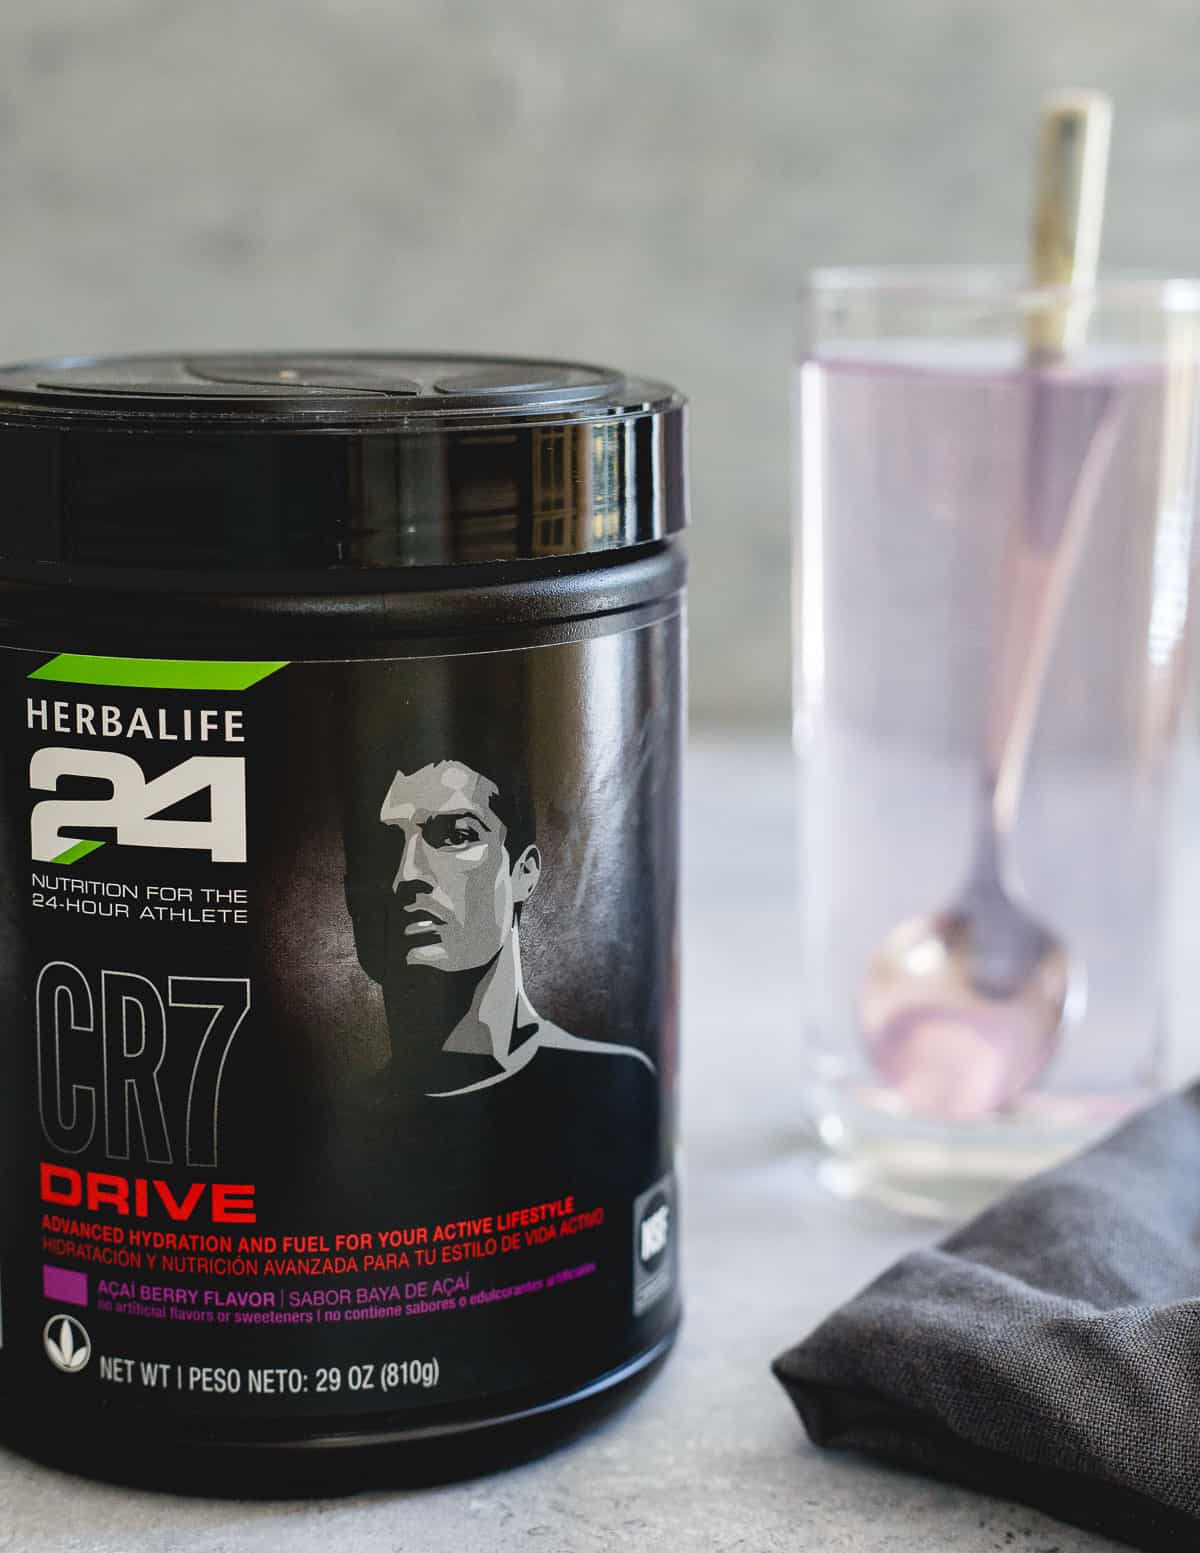 Herbalife's CR7 Drive is a great hydration option for athletes with a blend of electrolytes, carbohydrates and vitamins.